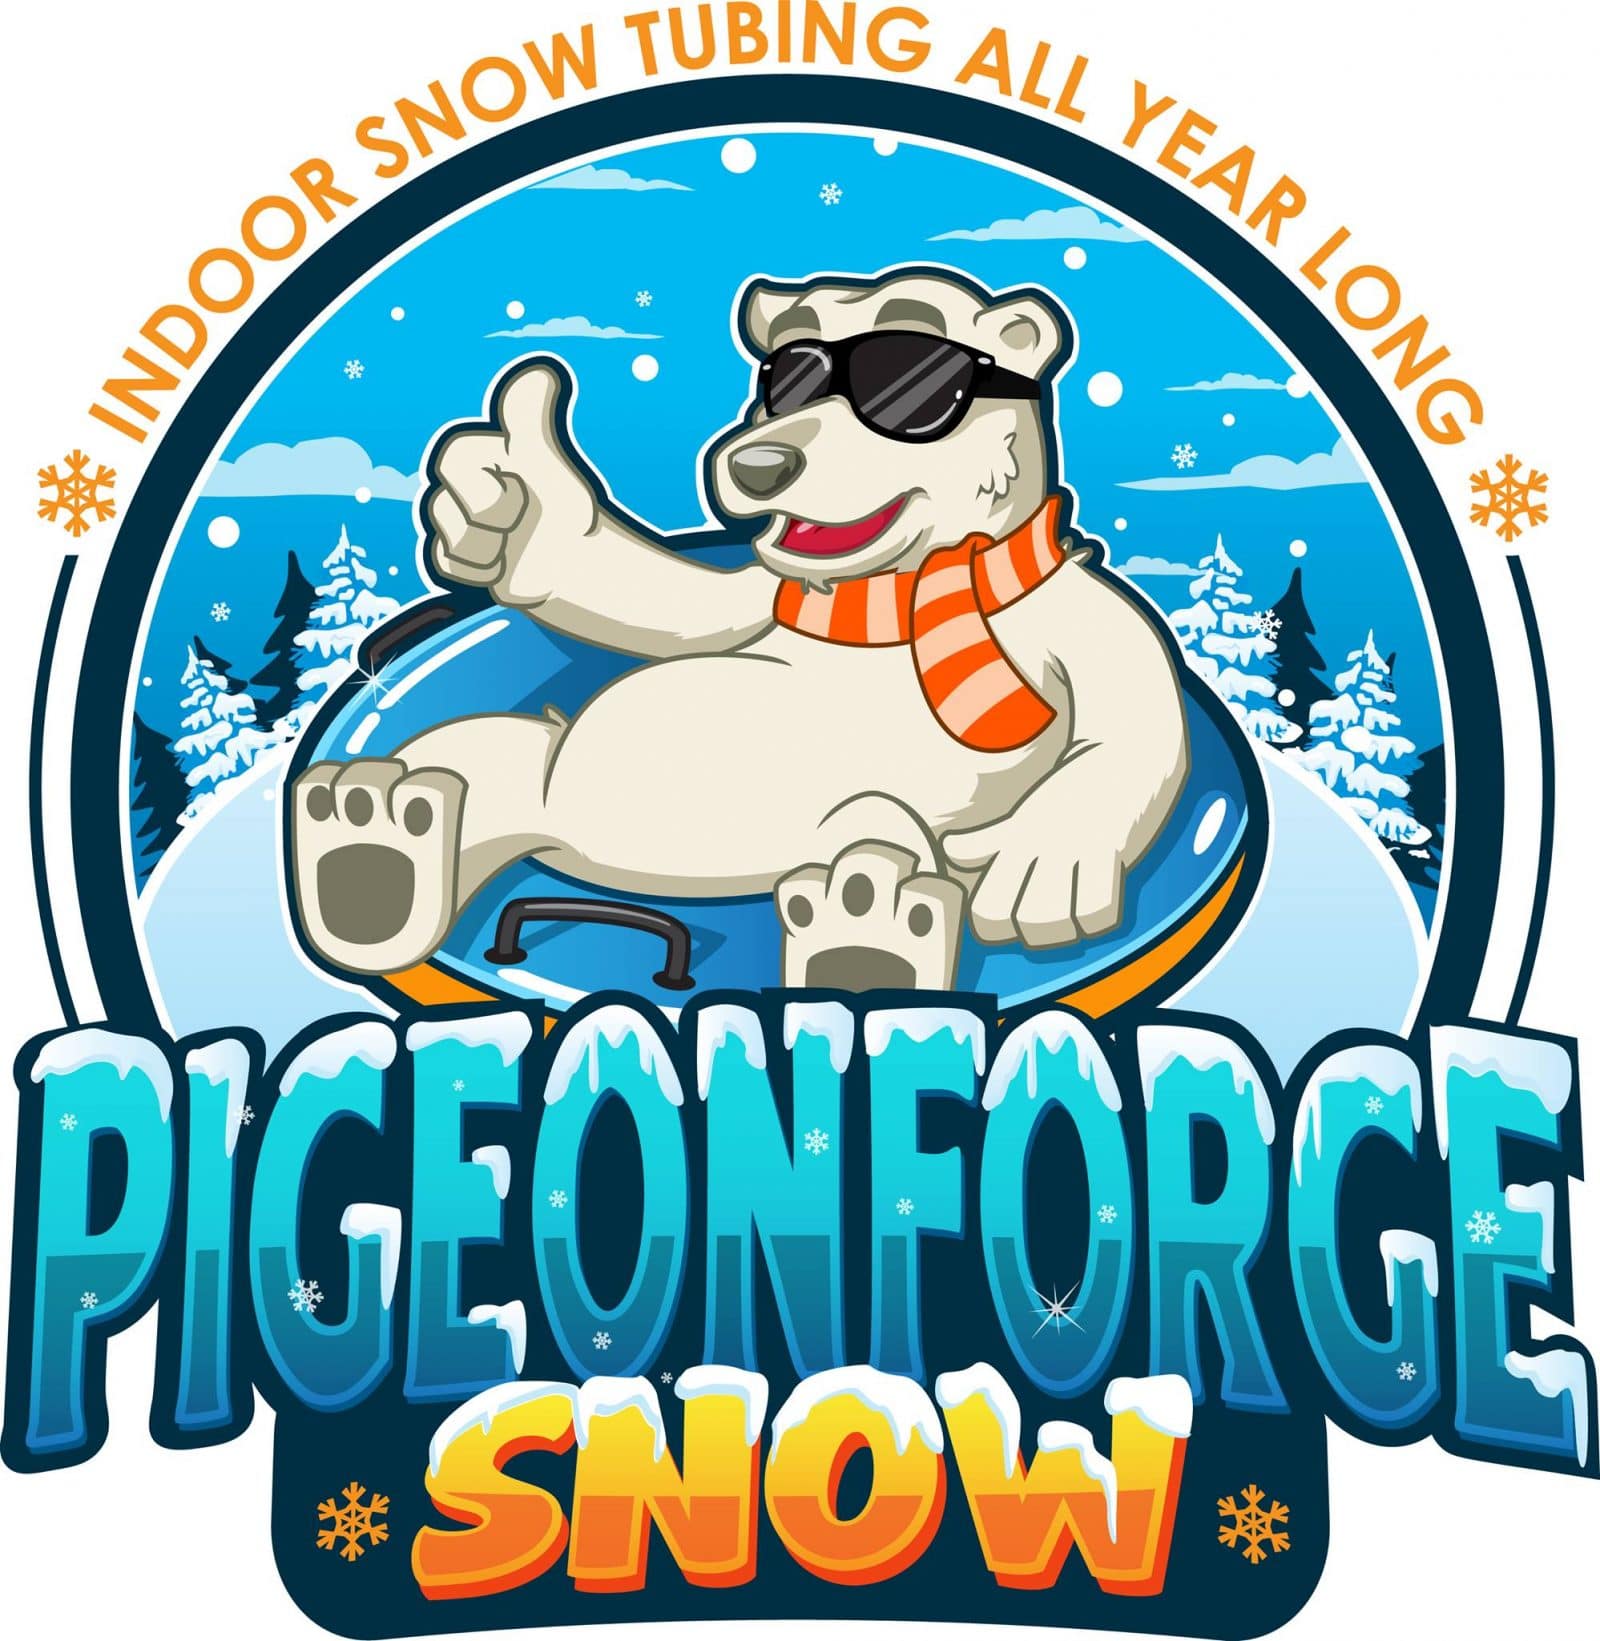 Pigeon Forge Snow - Indoor Snow Tubing in Pigeon Forge